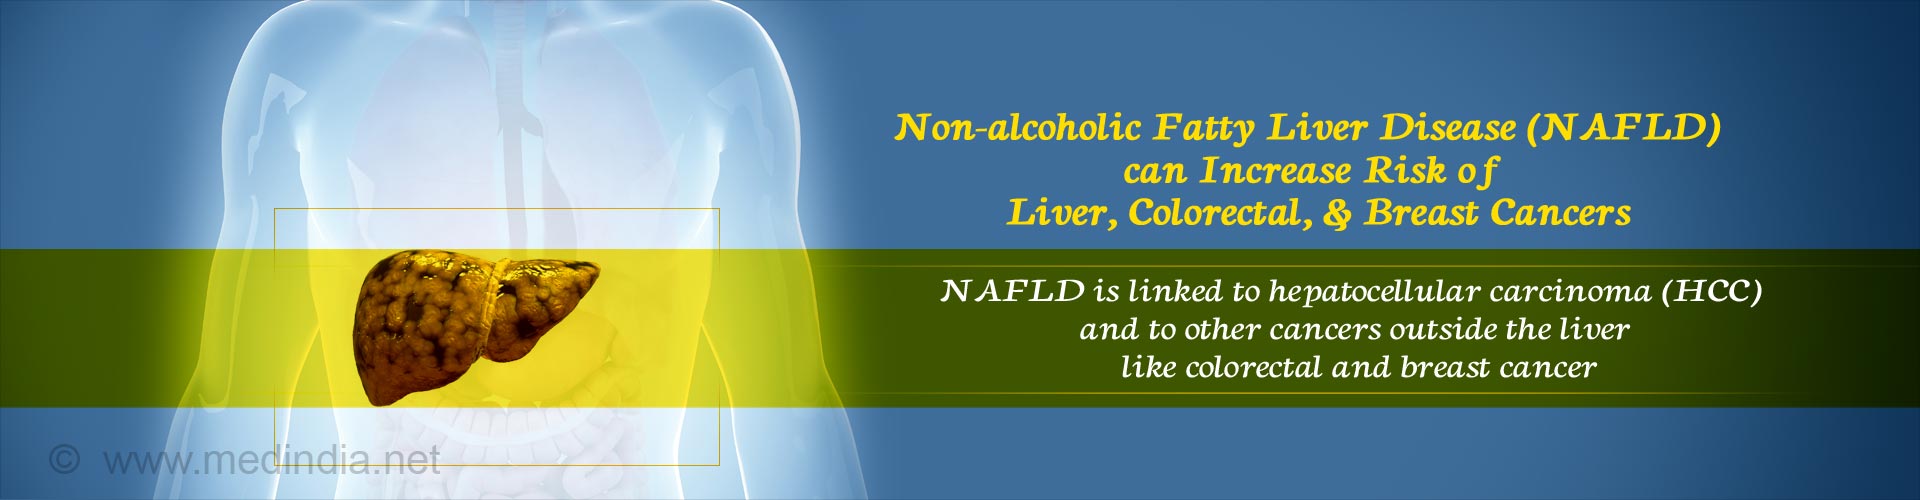 non-alcoholic fatty liver disease (NAFLD) can increase risk of liver, colorectal & breast cancers
- NAFLD is linked to hepatocellular carcinoma (HCC) and to other cancers outside the liver like colorectal and breast cancer